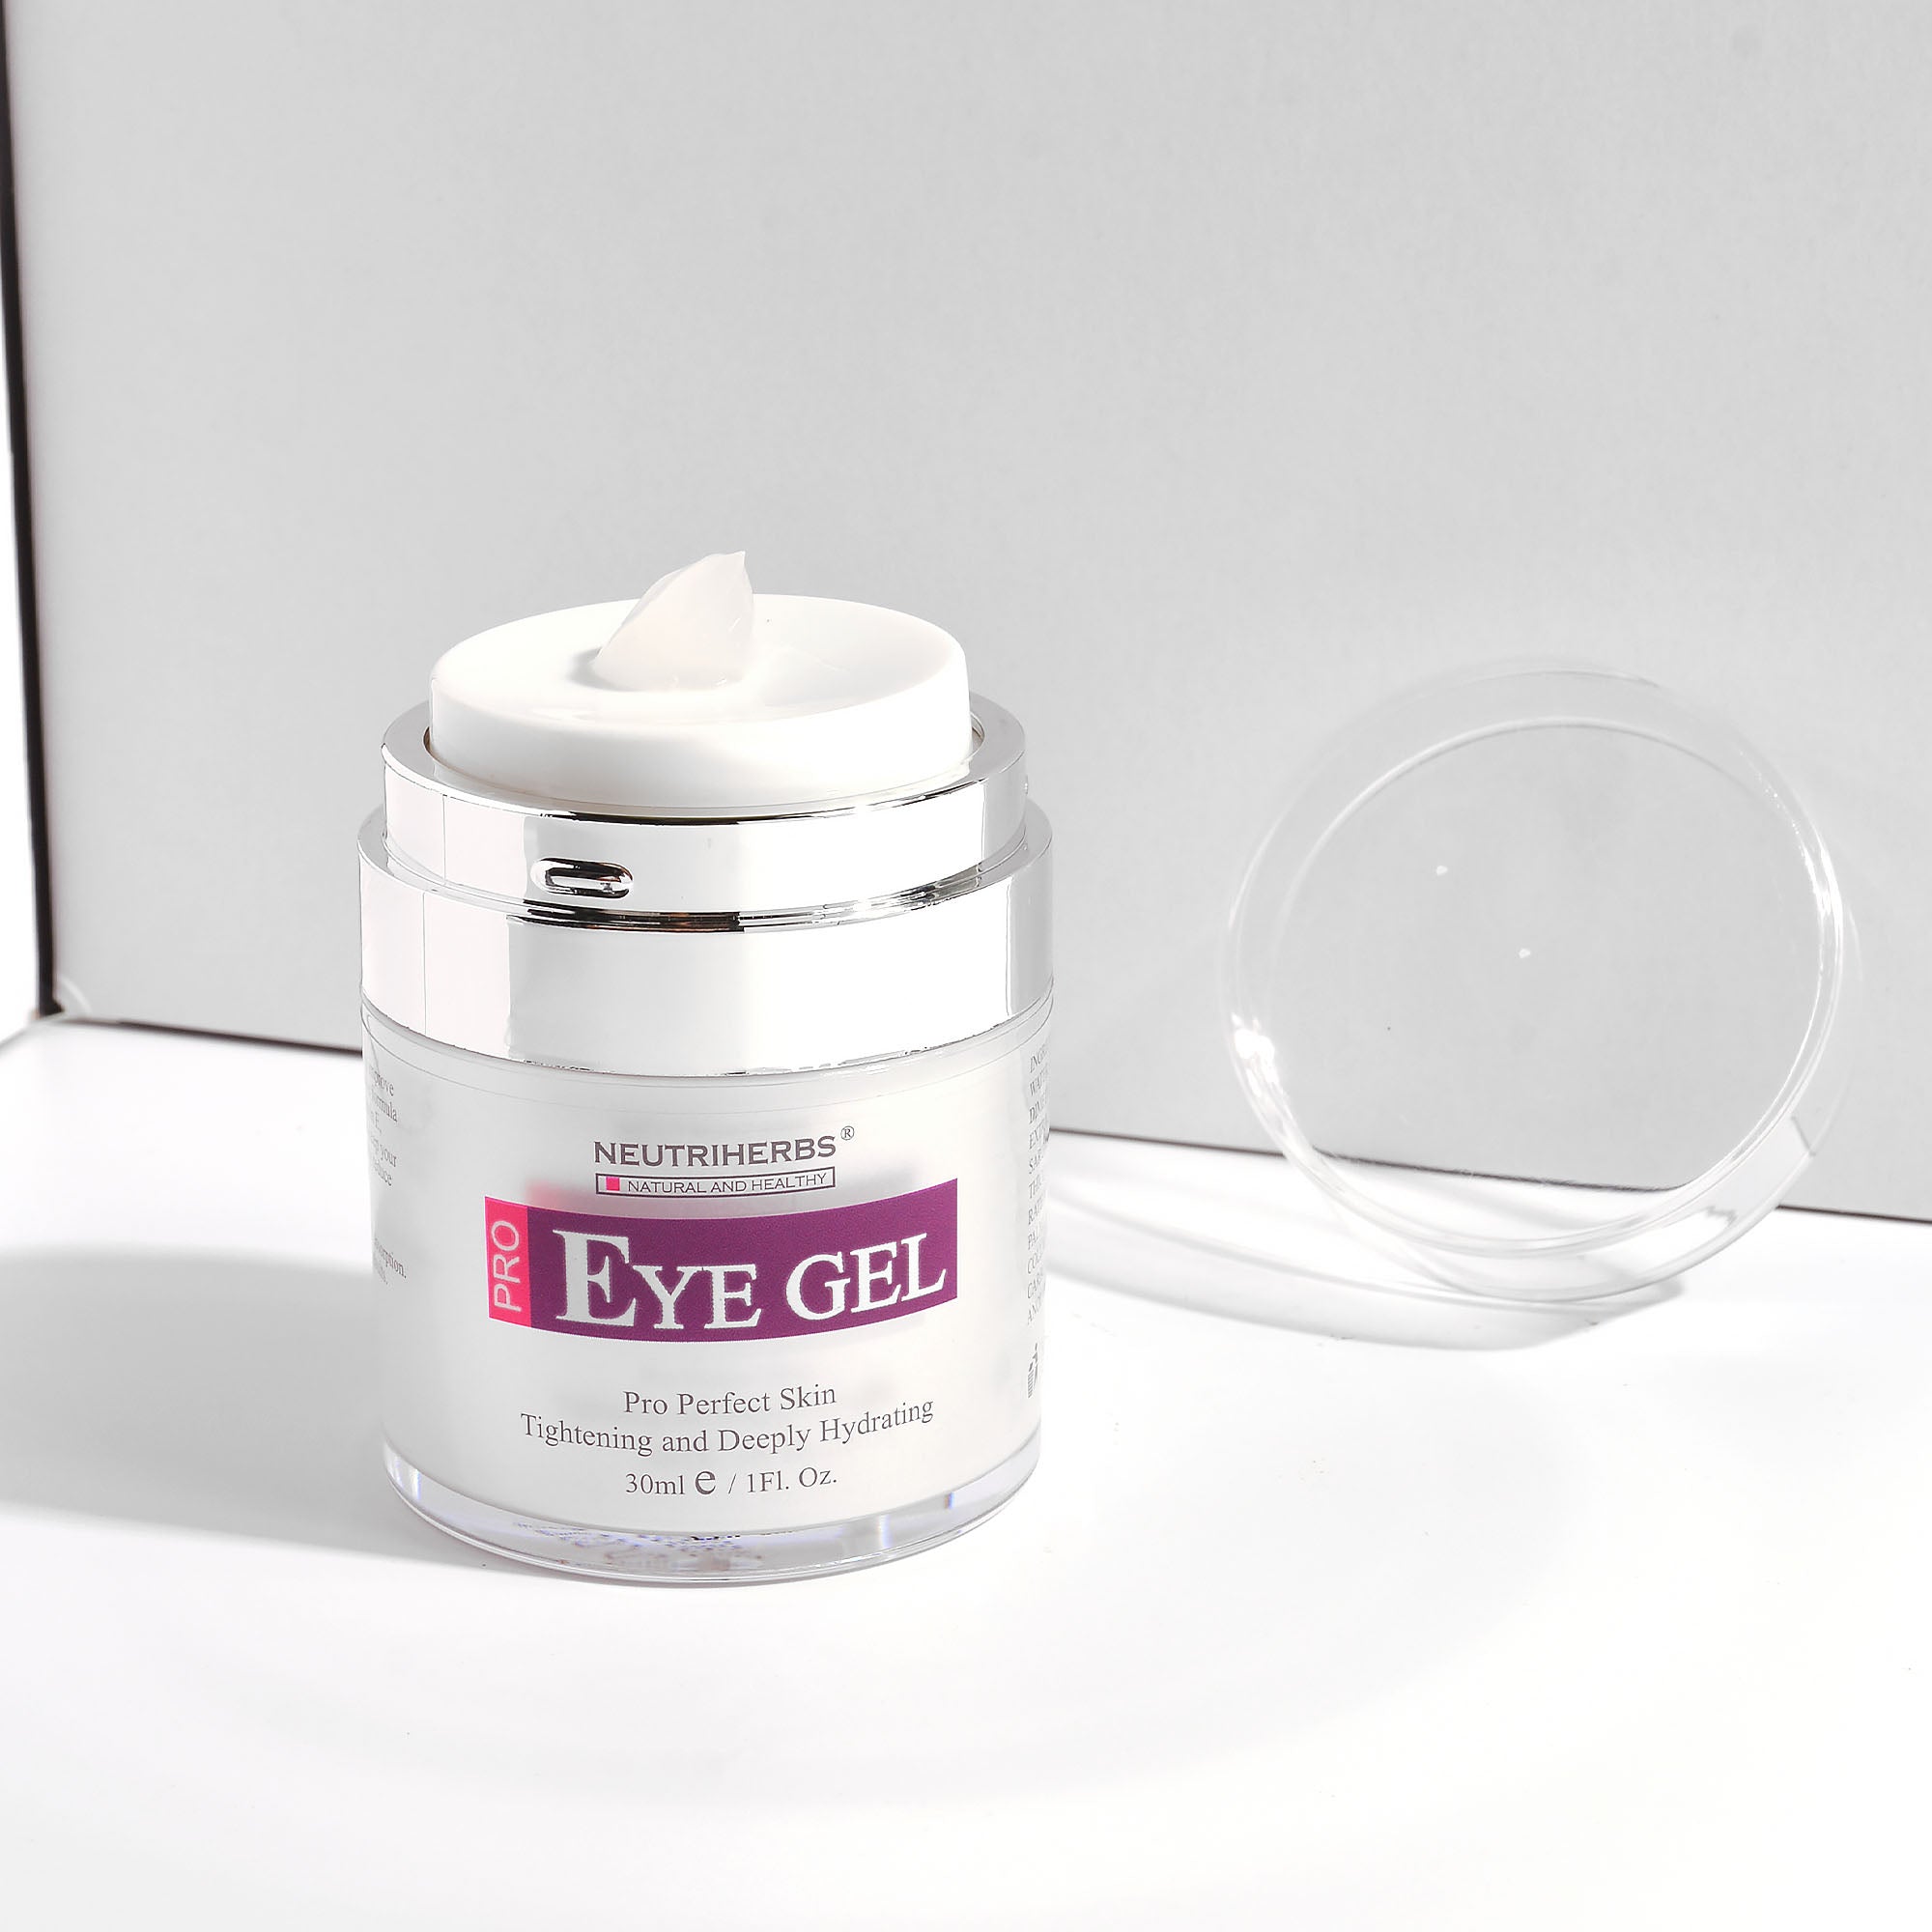 squeeze our the eye gel